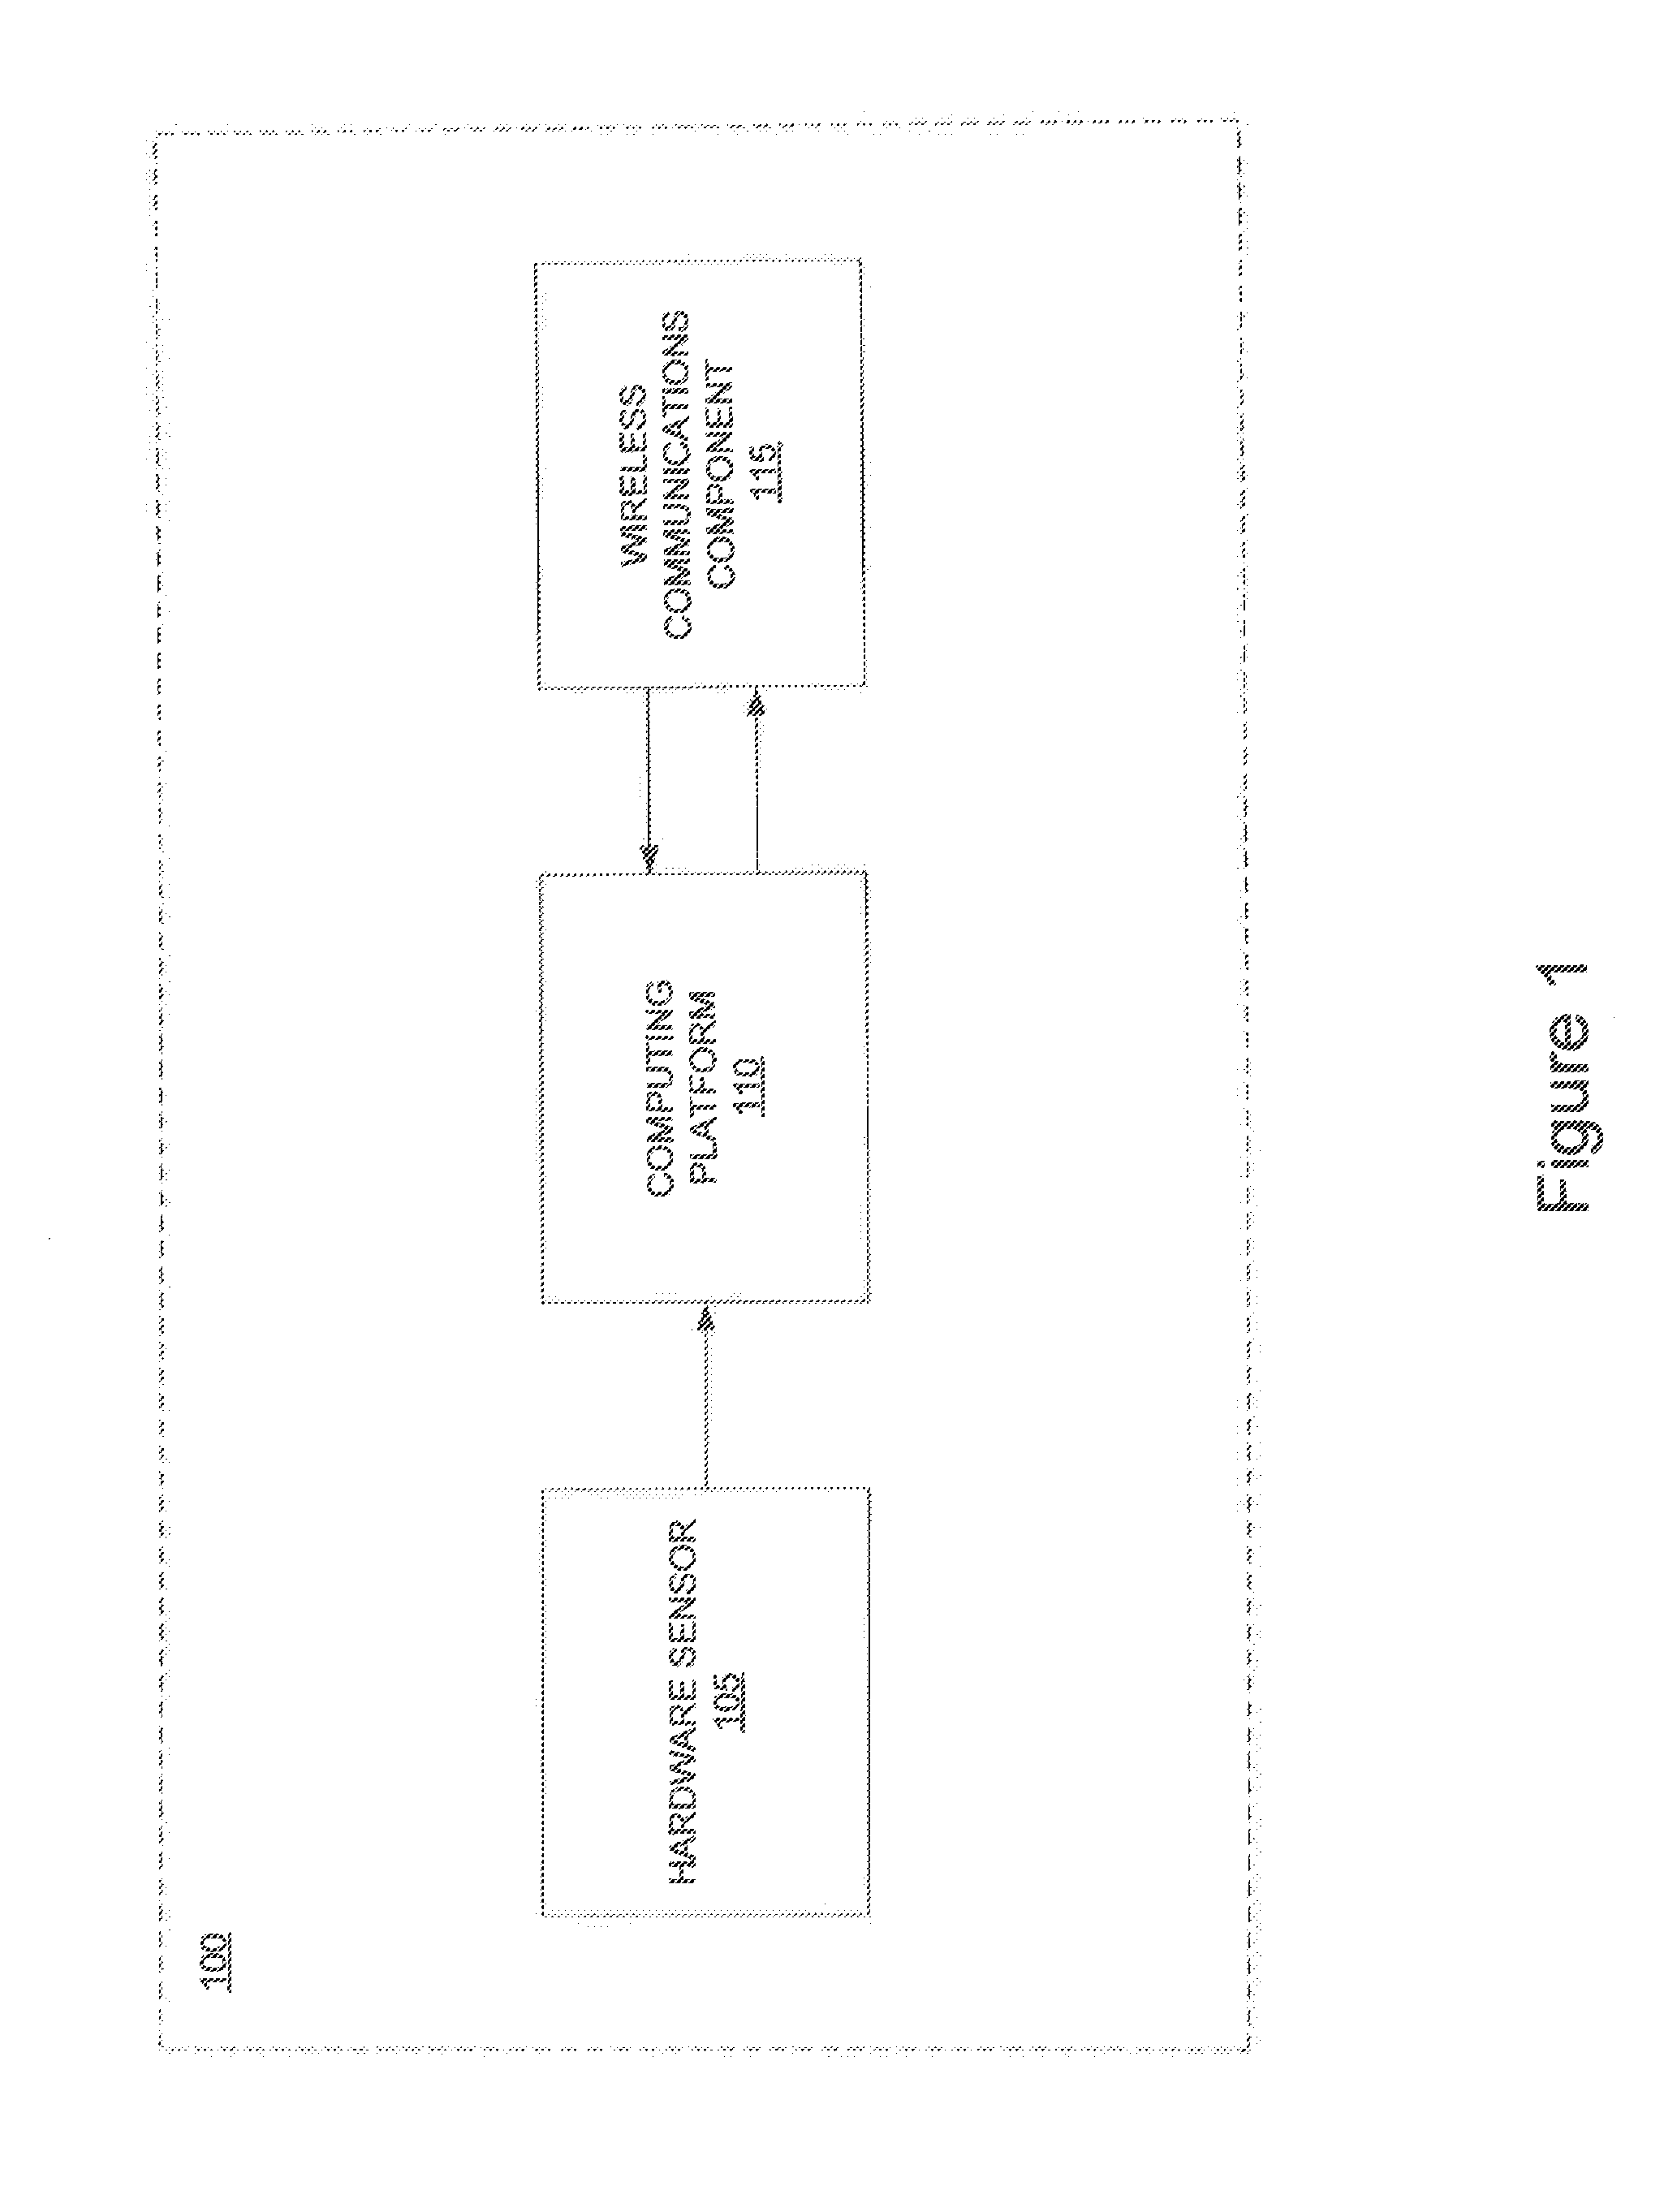 System and method for performing a secure cryptographic operation on a mobile device including an entropy filter